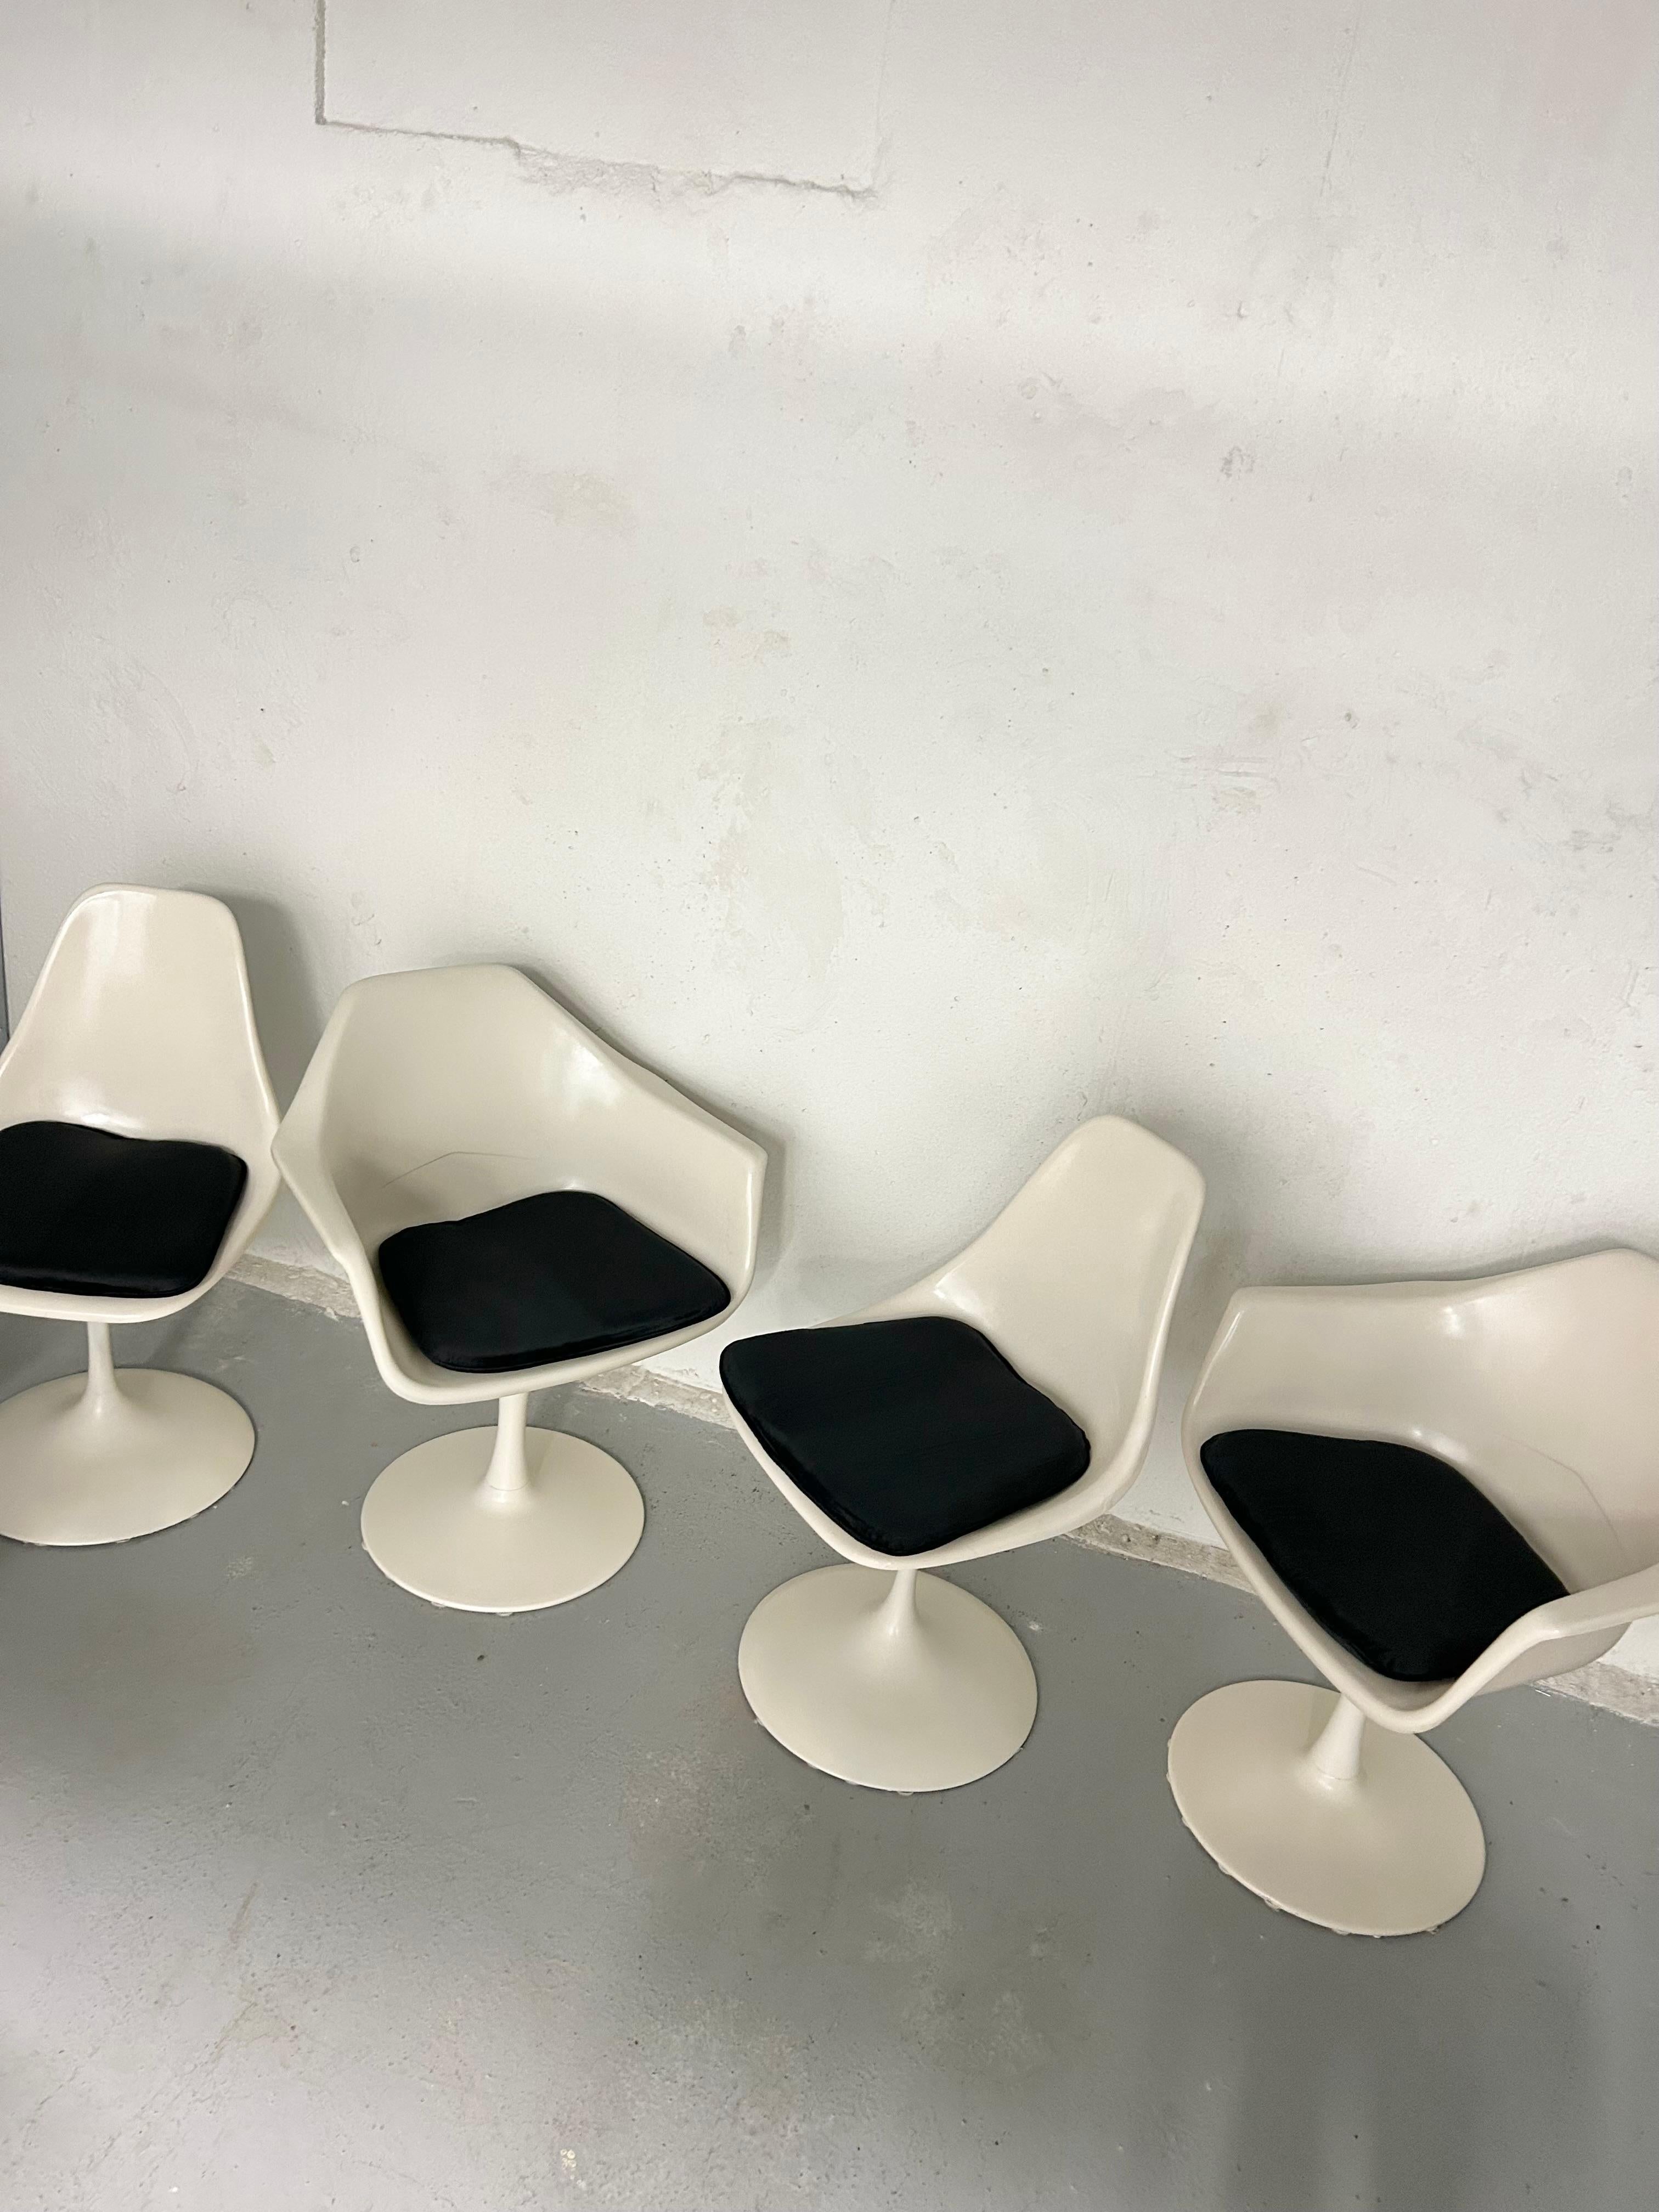 Vintage space age fiberglass swivel tulip chairs. In the style of Eero Saarinen. Manufacturer unknown. In good vintage condition. Black velvet cushions were purchased new to style the chairs and are not original but they are included. The two chairs